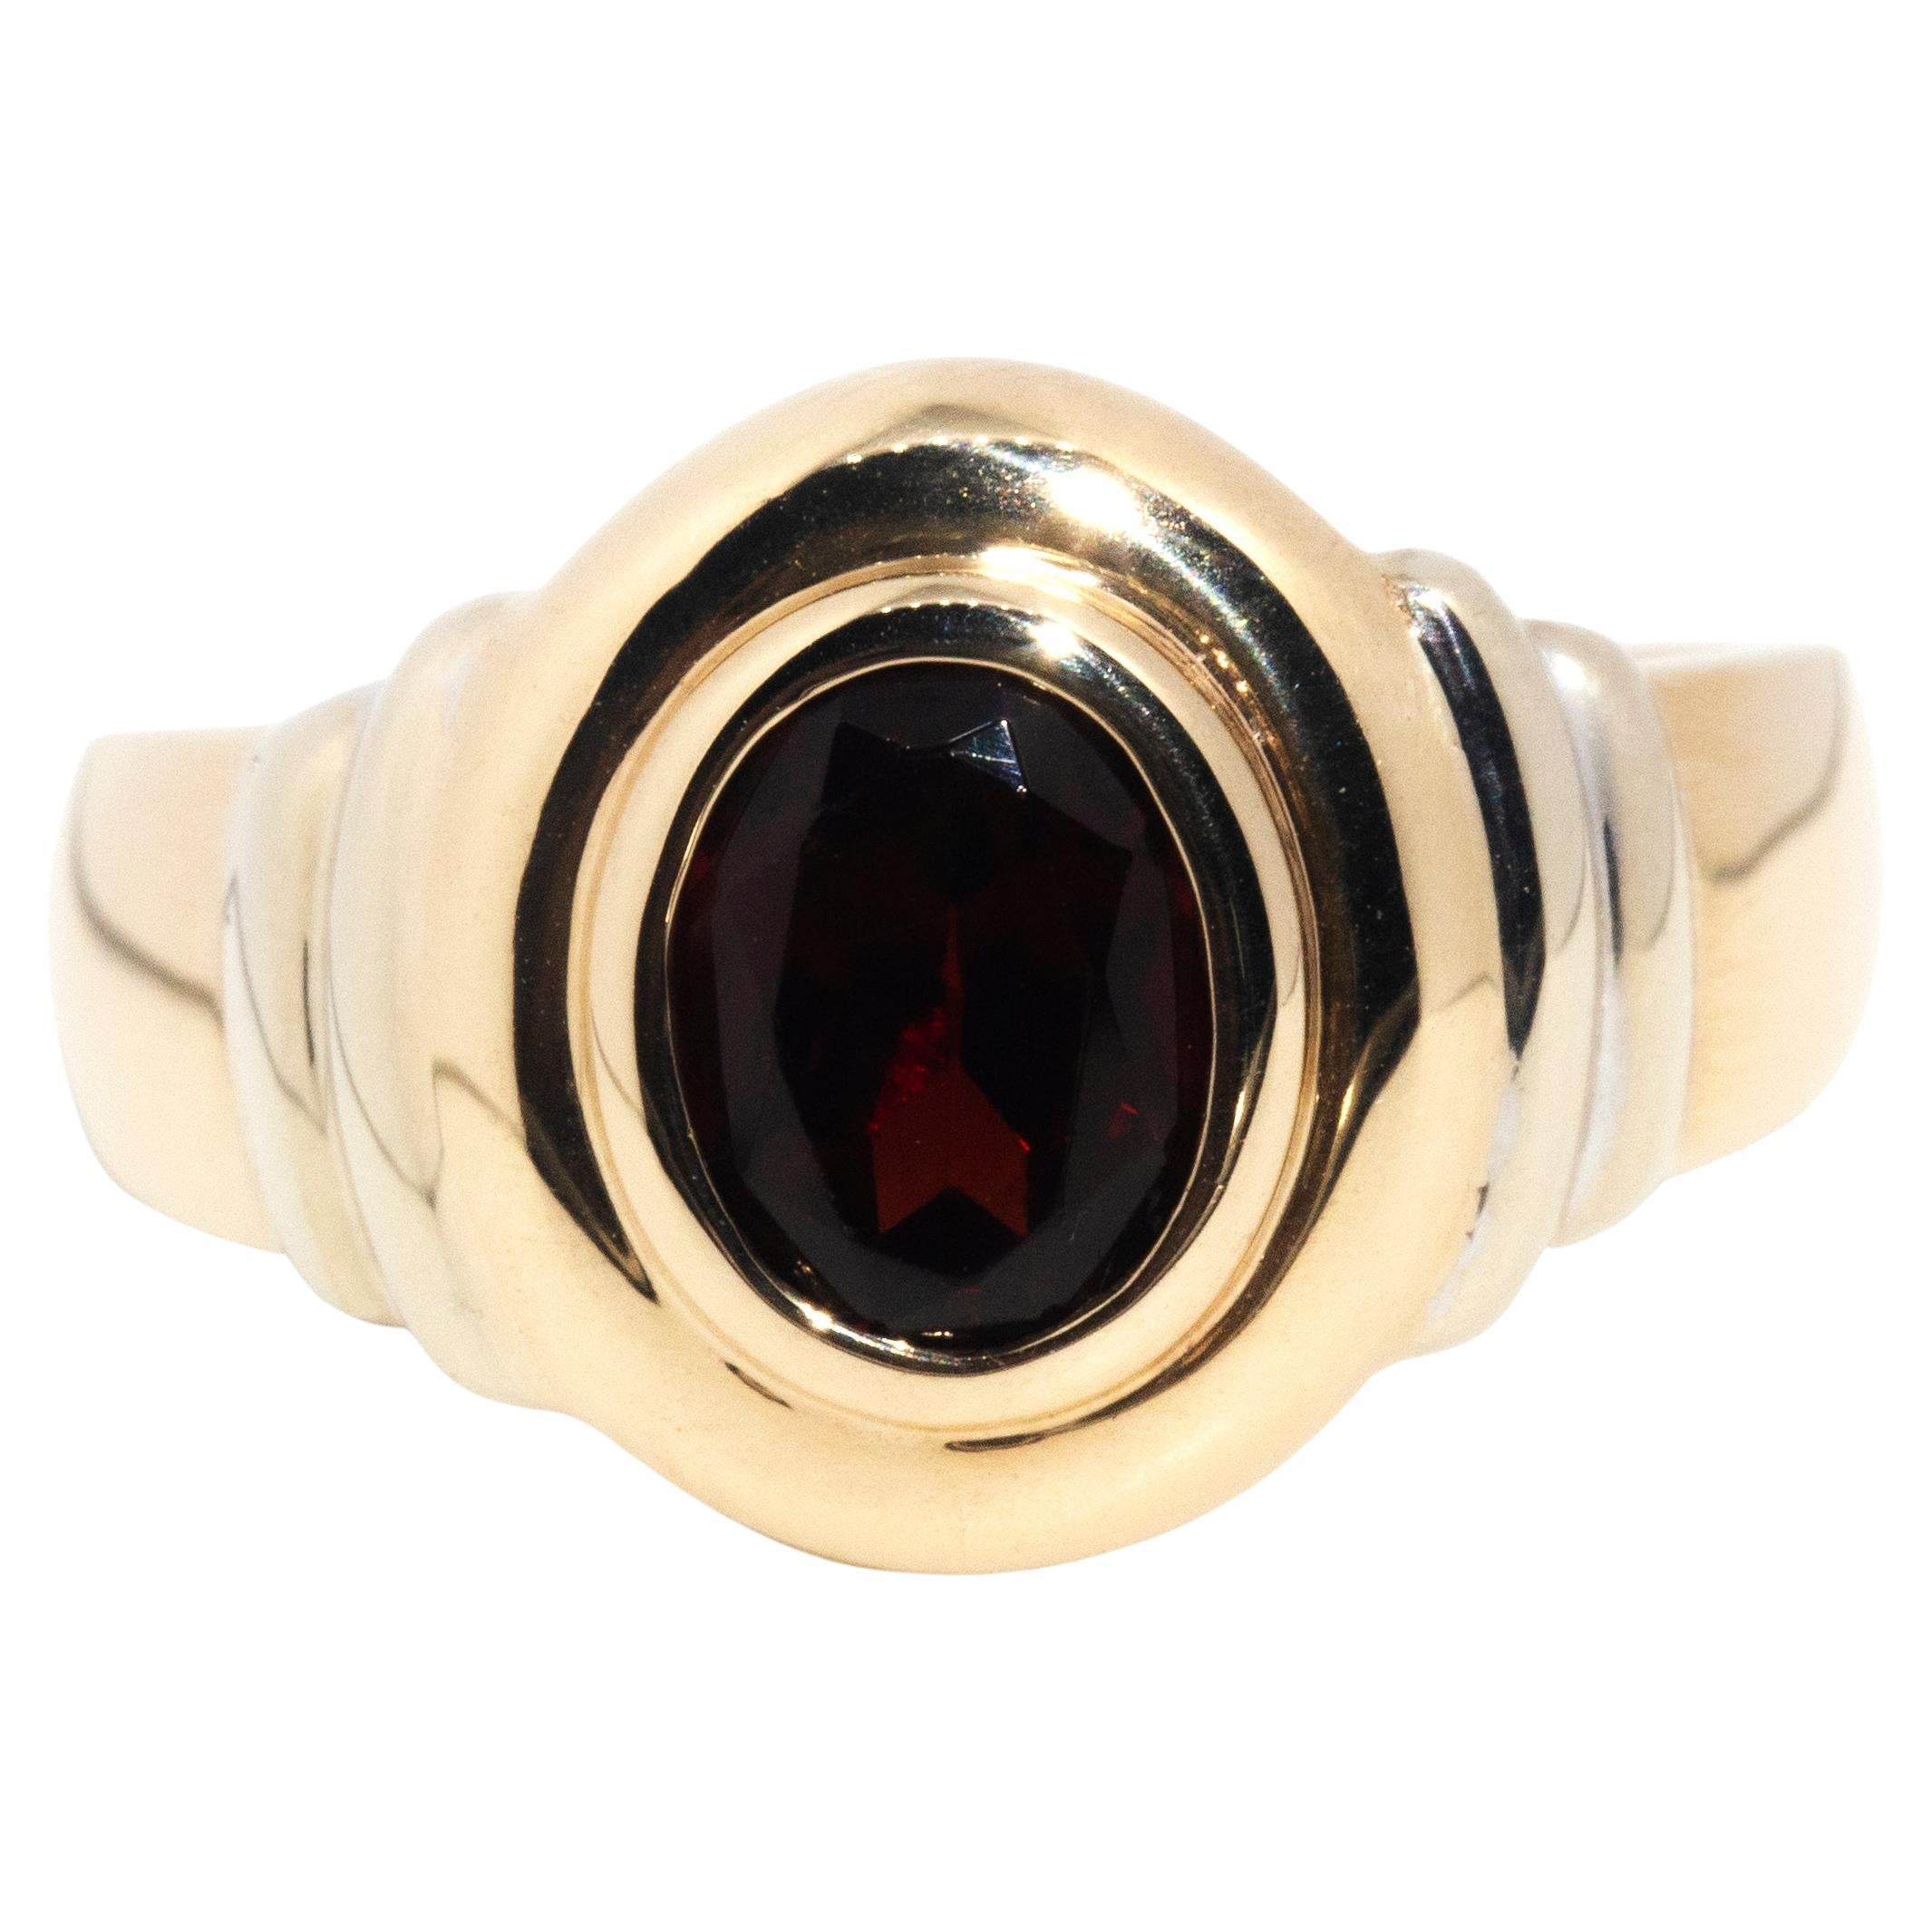 circa 1990s, Vintage 9 Carat Yellow Gold Double Rub over Oval Cut Garnet Ring For Sale